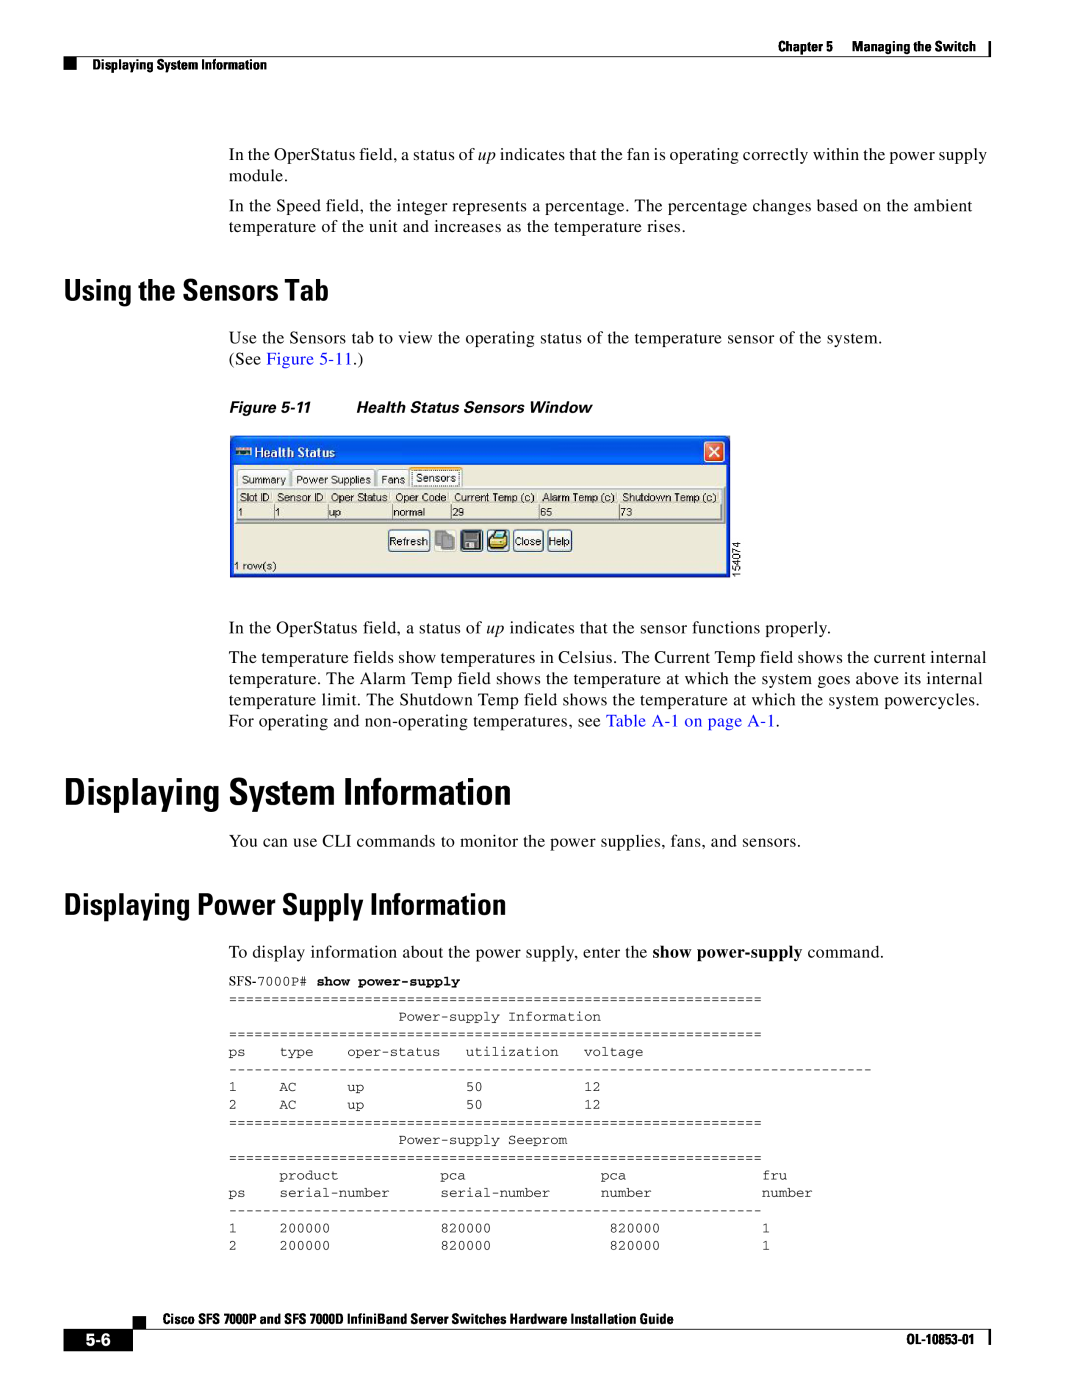 Cisco Systems SFS 7000P manual Displaying System Information, Using the Sensors Tab, Displaying Power Supply Information 